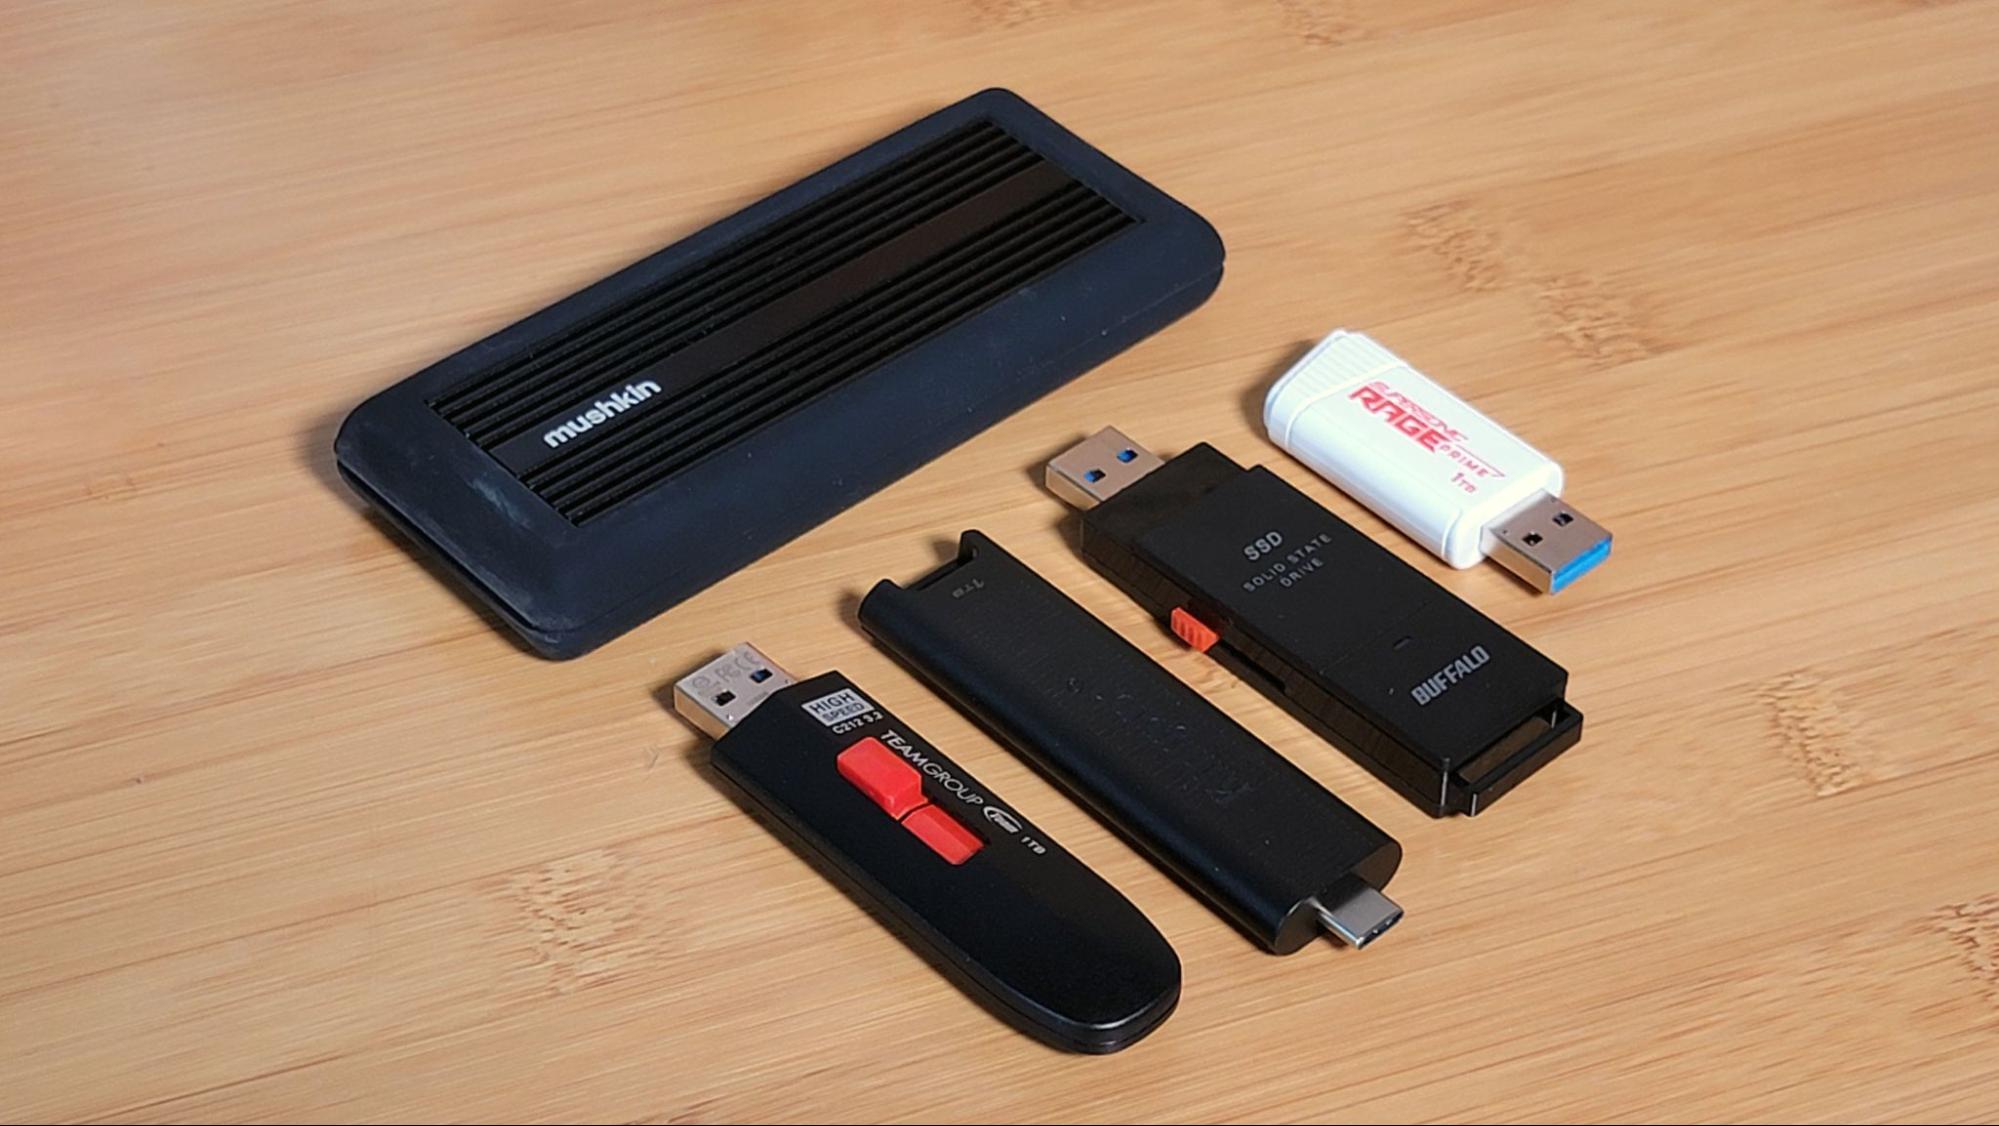 Onlooker fence Sanction Four 1TB USB Flash Drives Tested: Is It Time to Upgrade? | Tom's Hardware